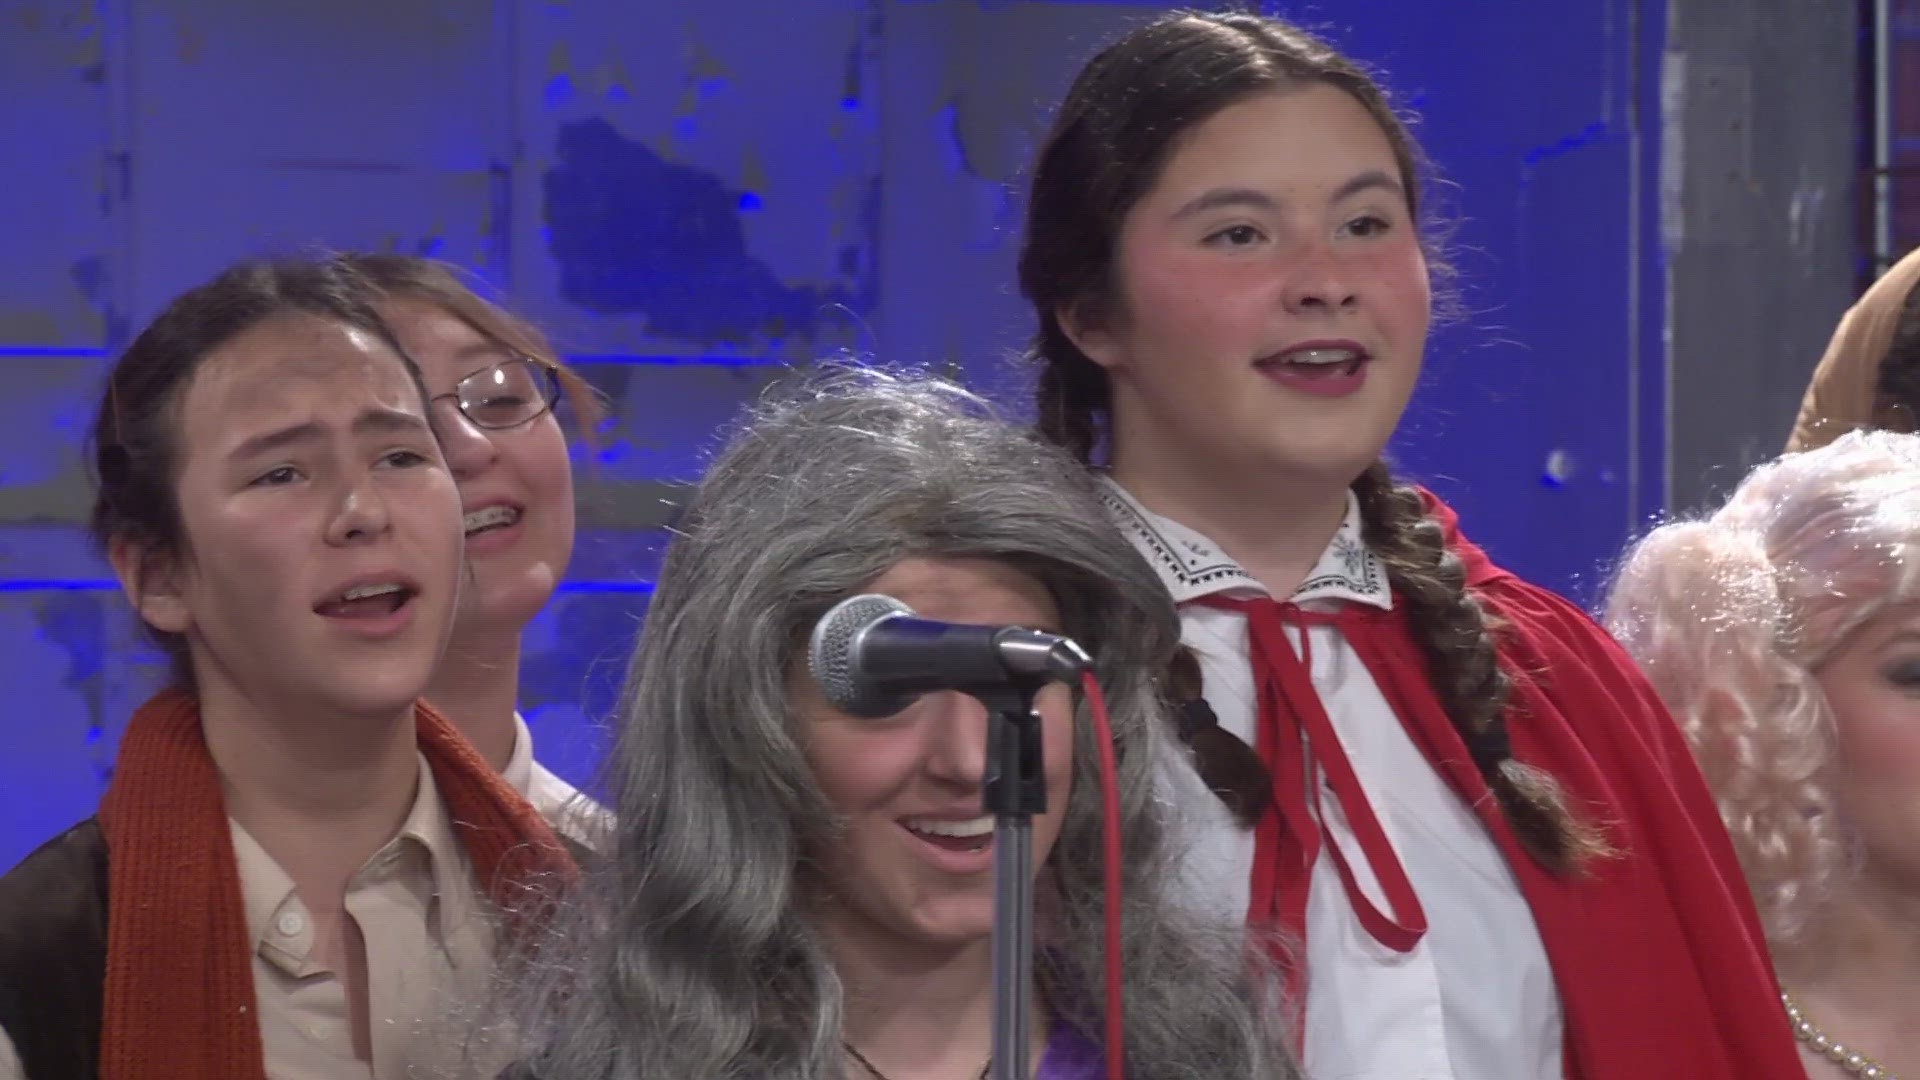 Cabrini High students give us a live preview of their upcoming production of "Into the Woods," which is costumed and choreographed by students.